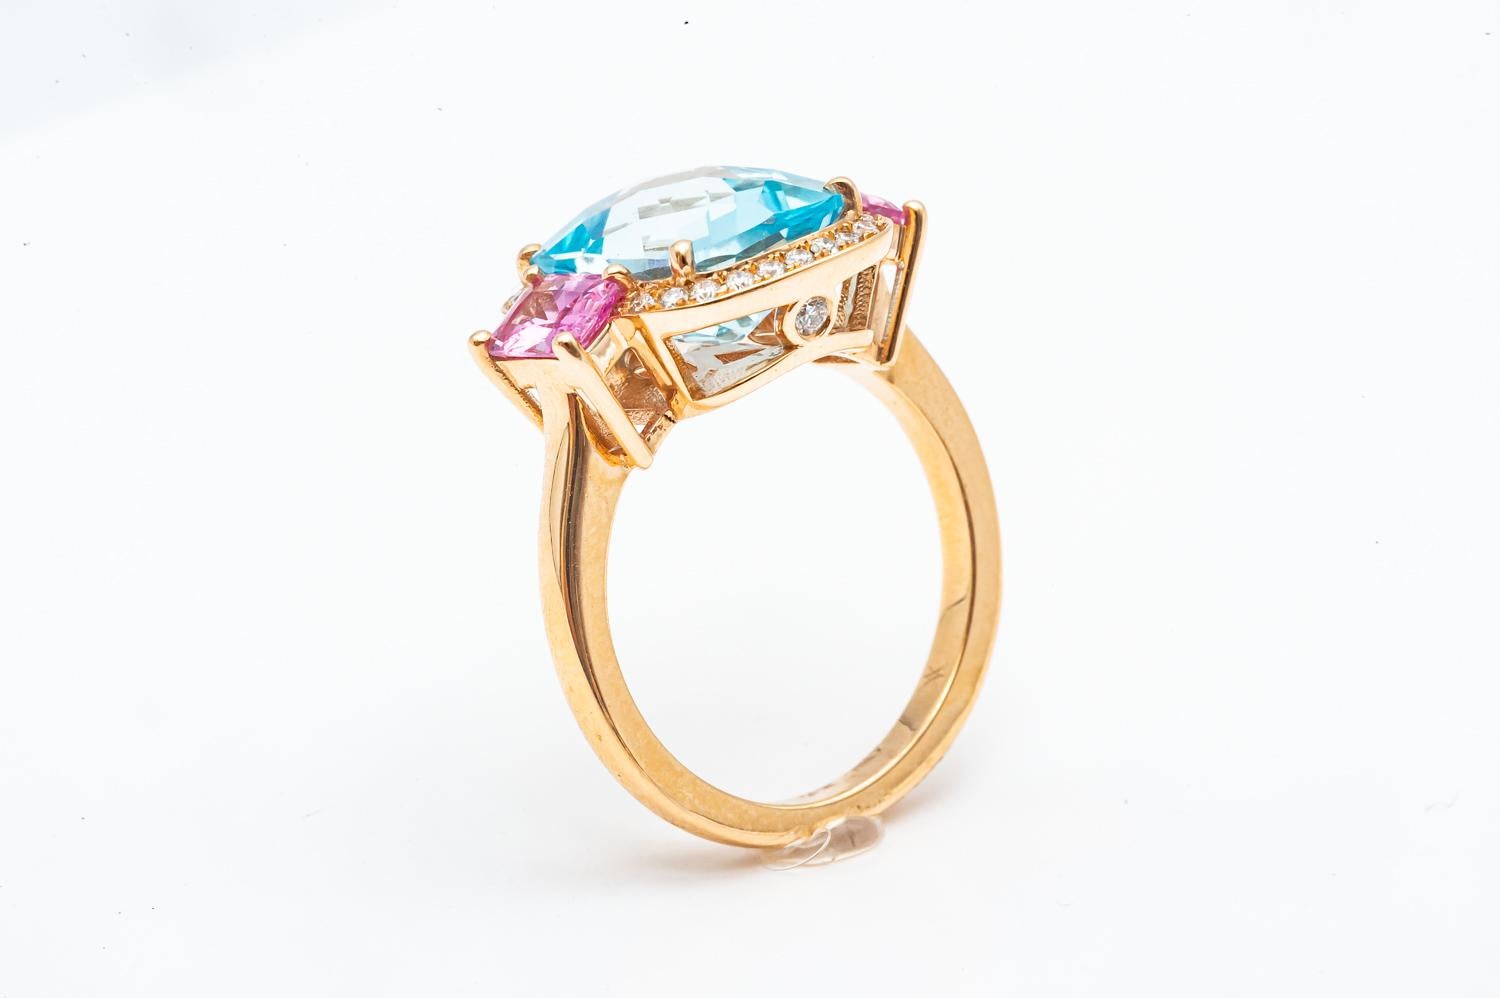 yellow topaz and sapphire ring